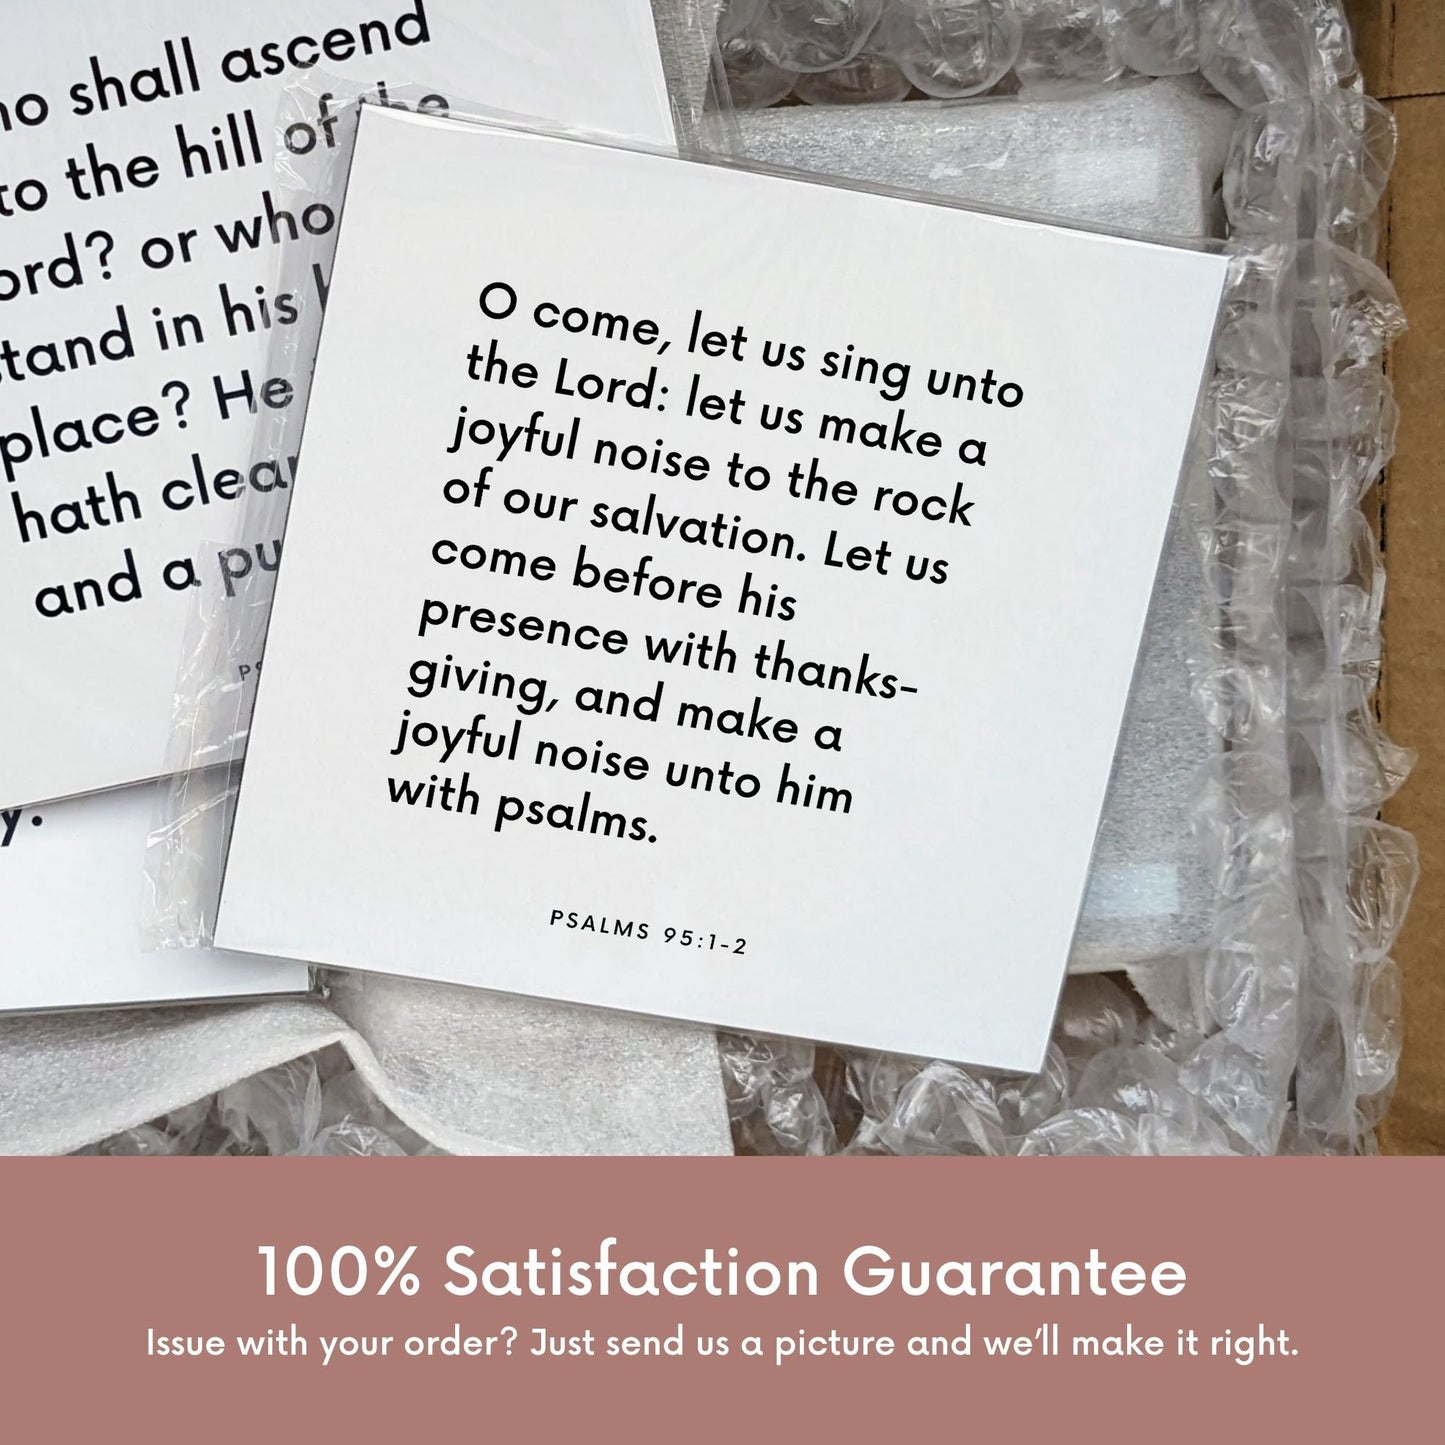 Shipping materials for scripture tile of Psalms 95:1-2 - "O come, let us sing unto the Lord"